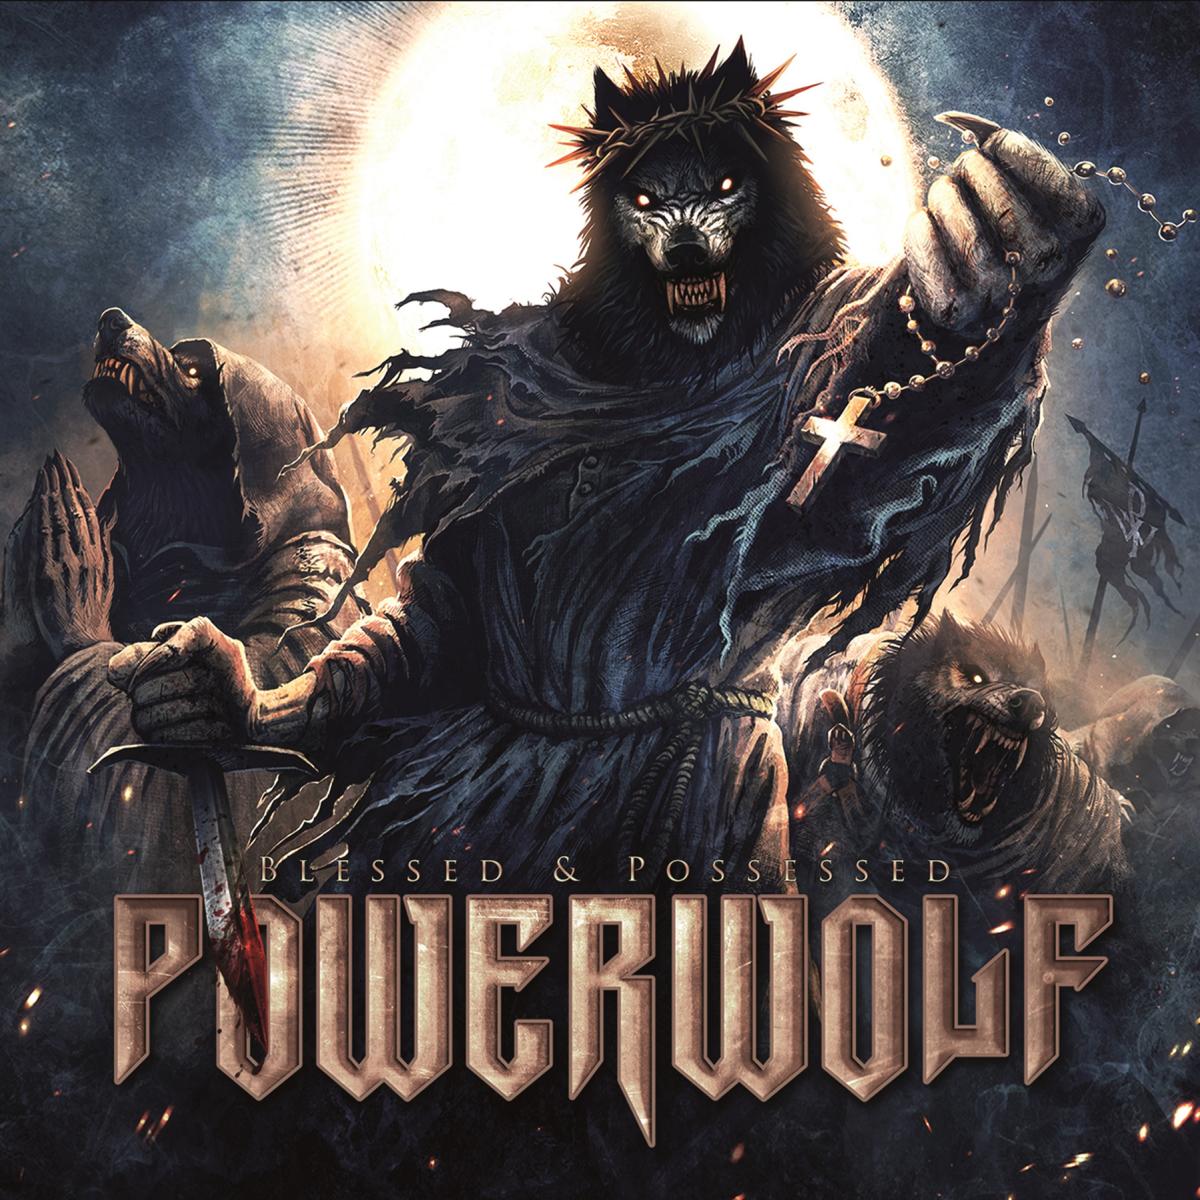 Exclusive CD Malleo Metallum available for pre-order from Germany (just  got posted on the band's Instagram right now!) : r/Powerwolf